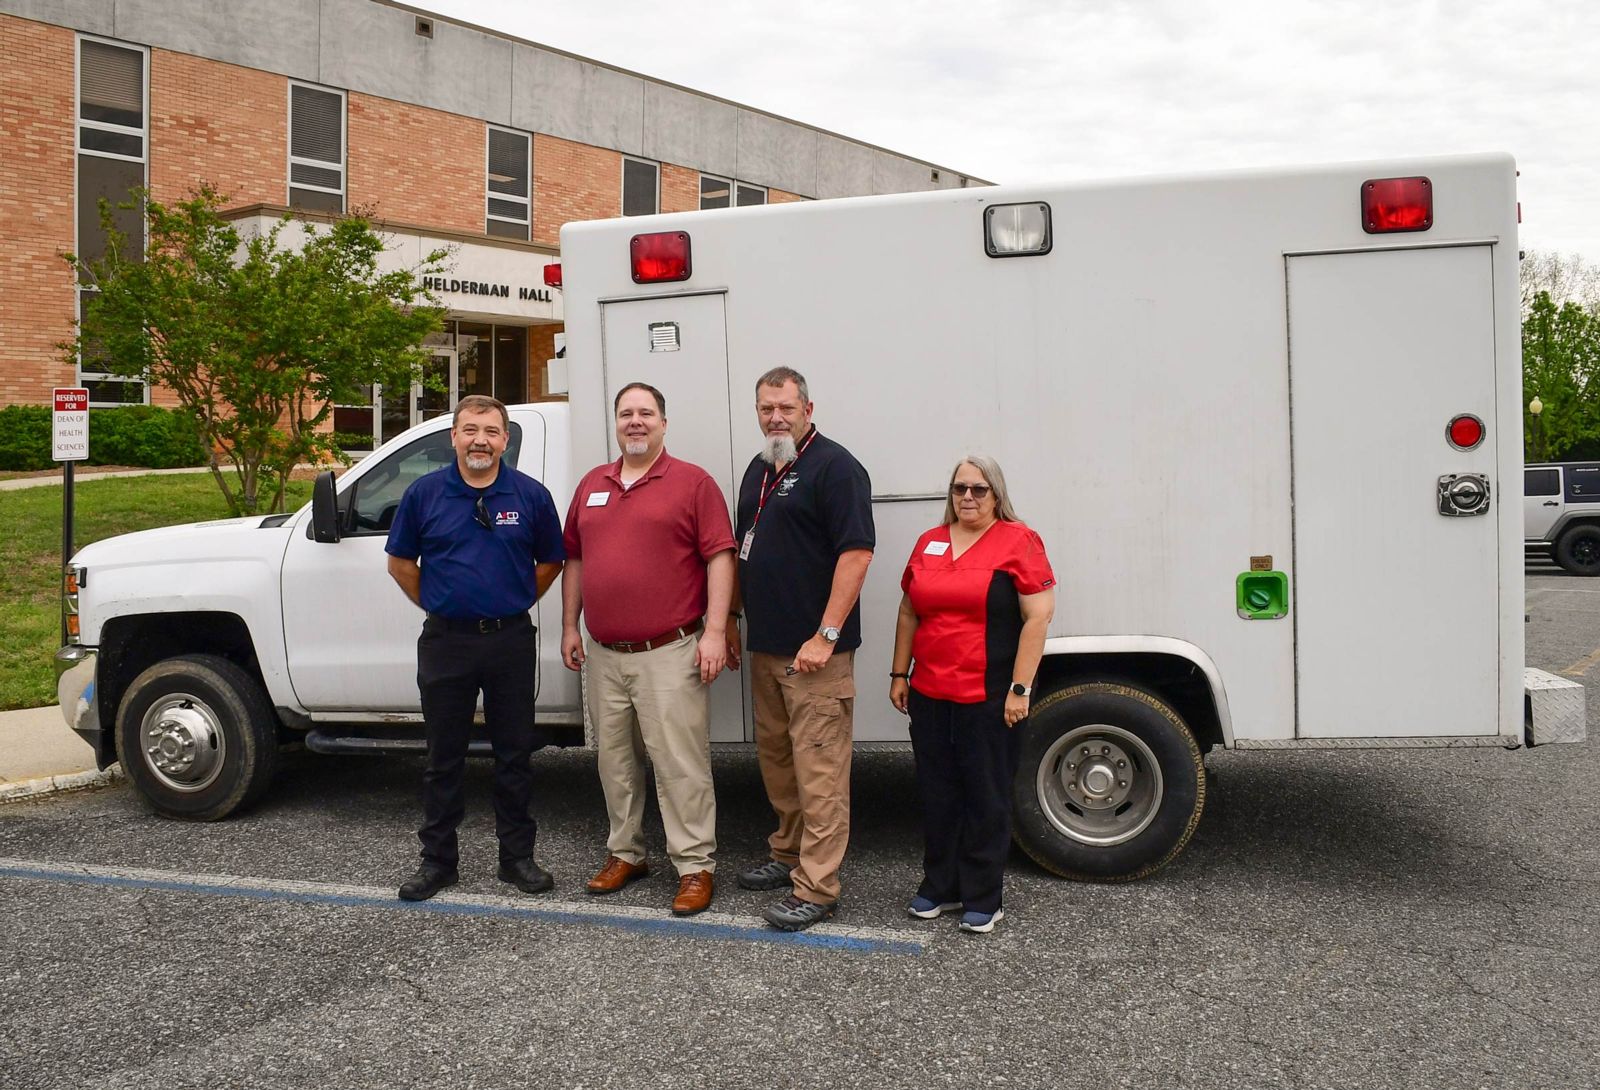 Pictured with the donated ambulance are, from left, Patrick Bright, director of operations for AMED; John Hollingsworth, director of Gadsden State’s EMS Program; Brian Selke, faculty member; and Tracy Shew, faculty member.